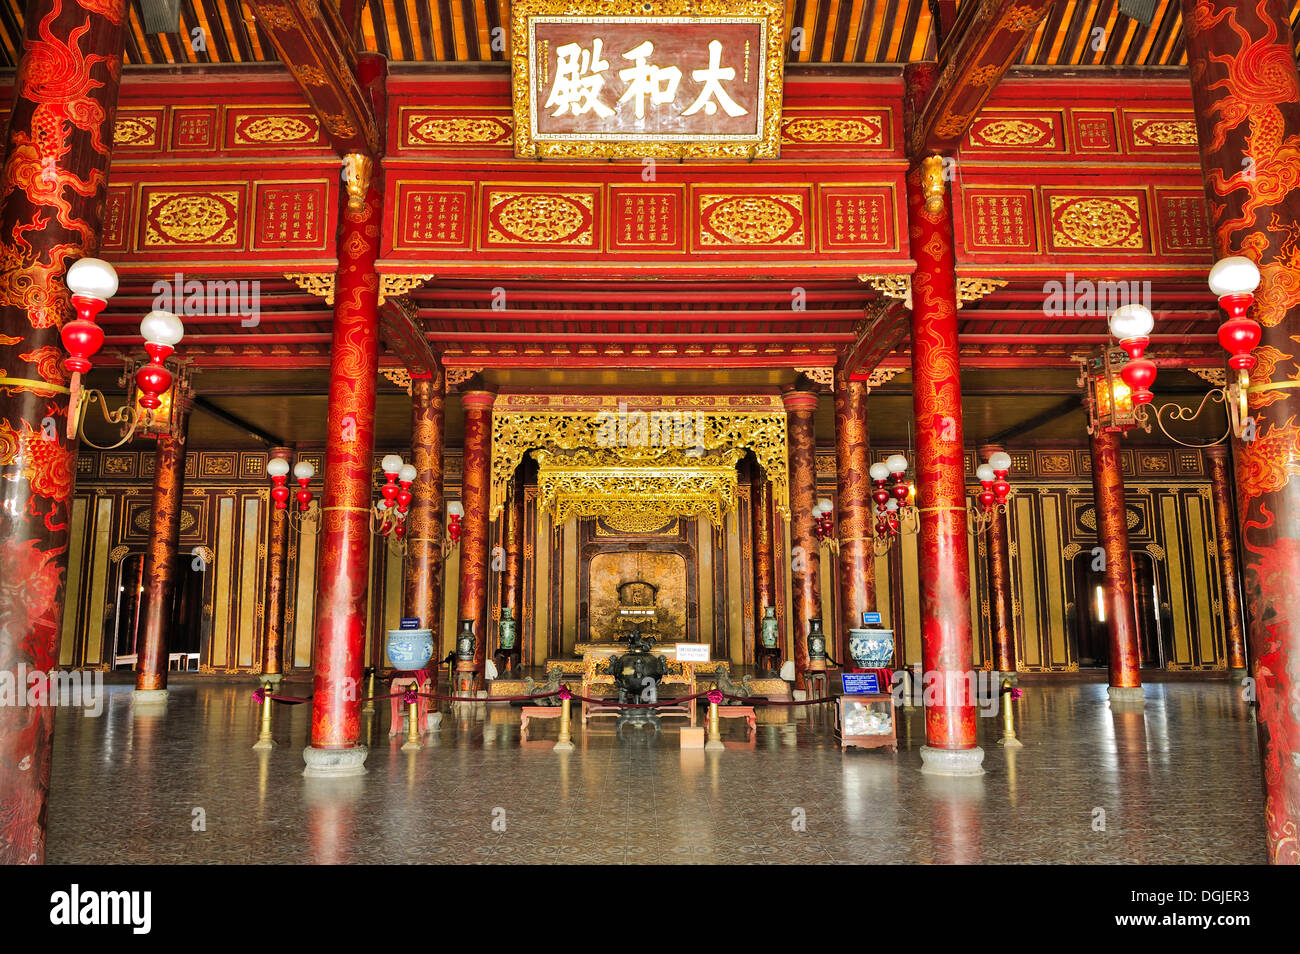 Throne room Thai Hoa palace, Hoang Thanh Imperial Palace, Forbidden City, Hue, UNESCO World Heritage Site, Vietnam, Asia Stock Photo